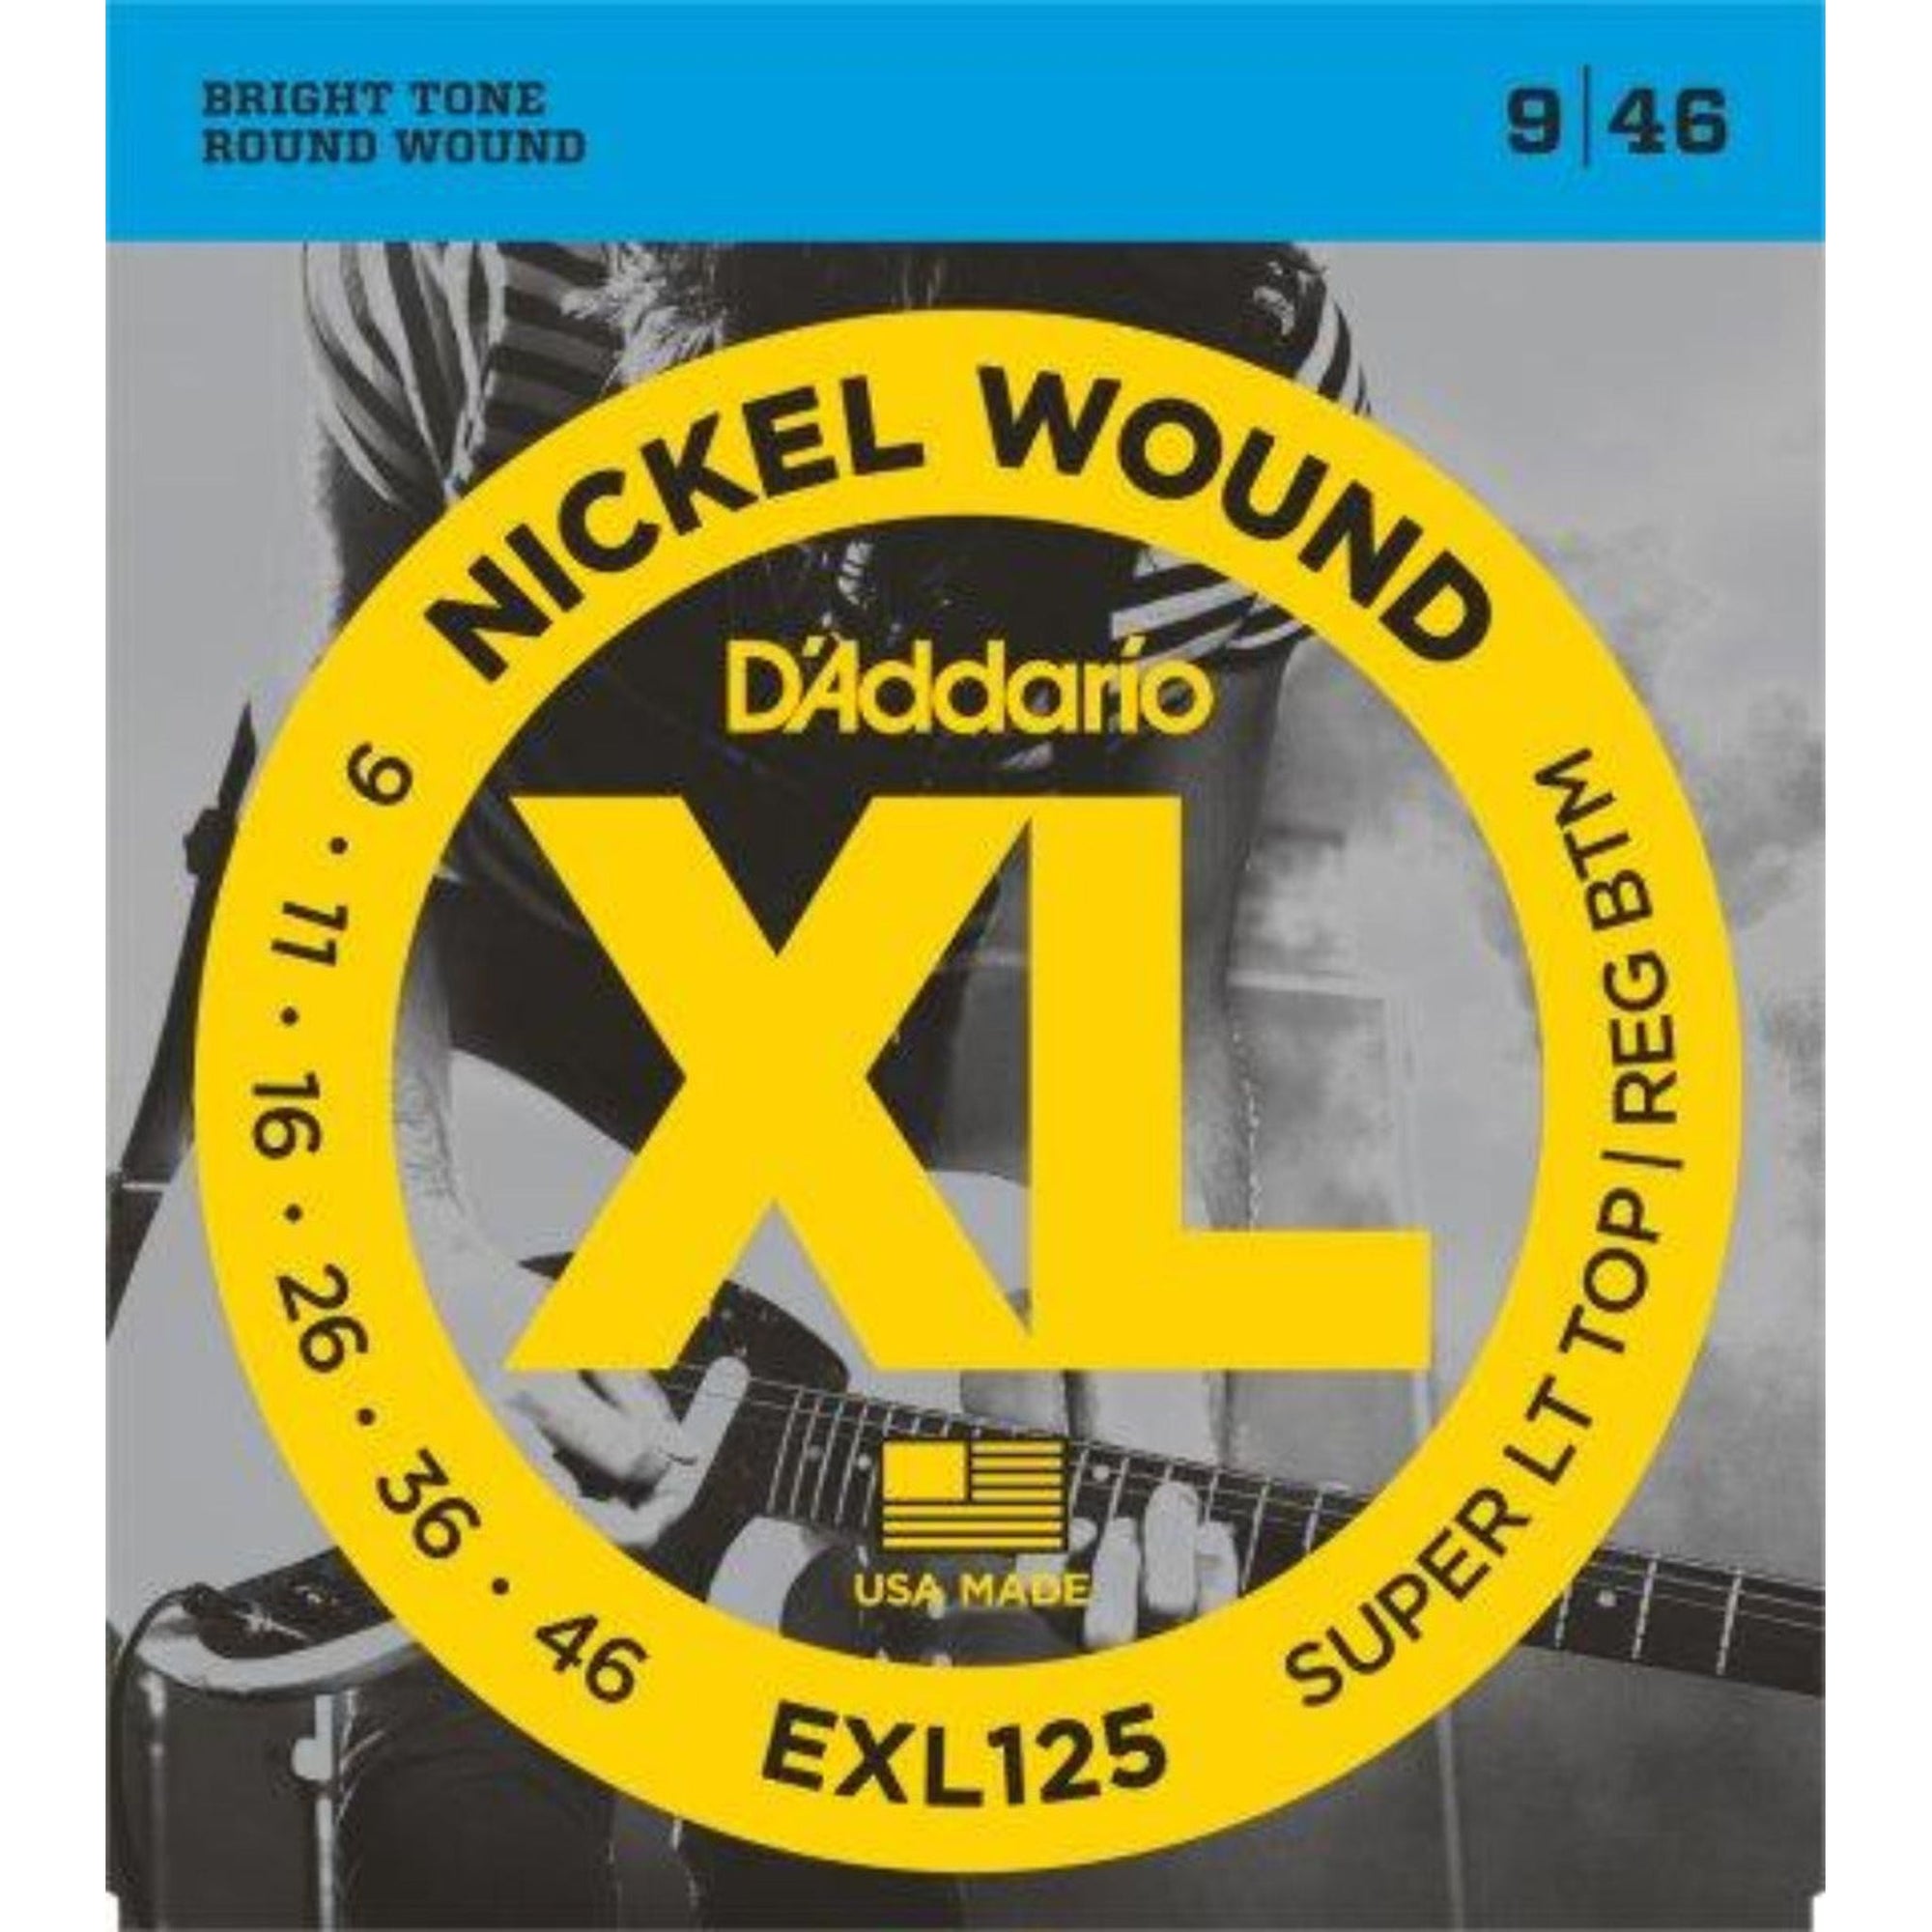 EXL125 is D'Addario's best selling hybrid set, combining the high strings from an EXL120 (.009) with the low strings from an EXL110 (.046). The result is a set with strong fundamental low end, but with super flexibility on the high strings.